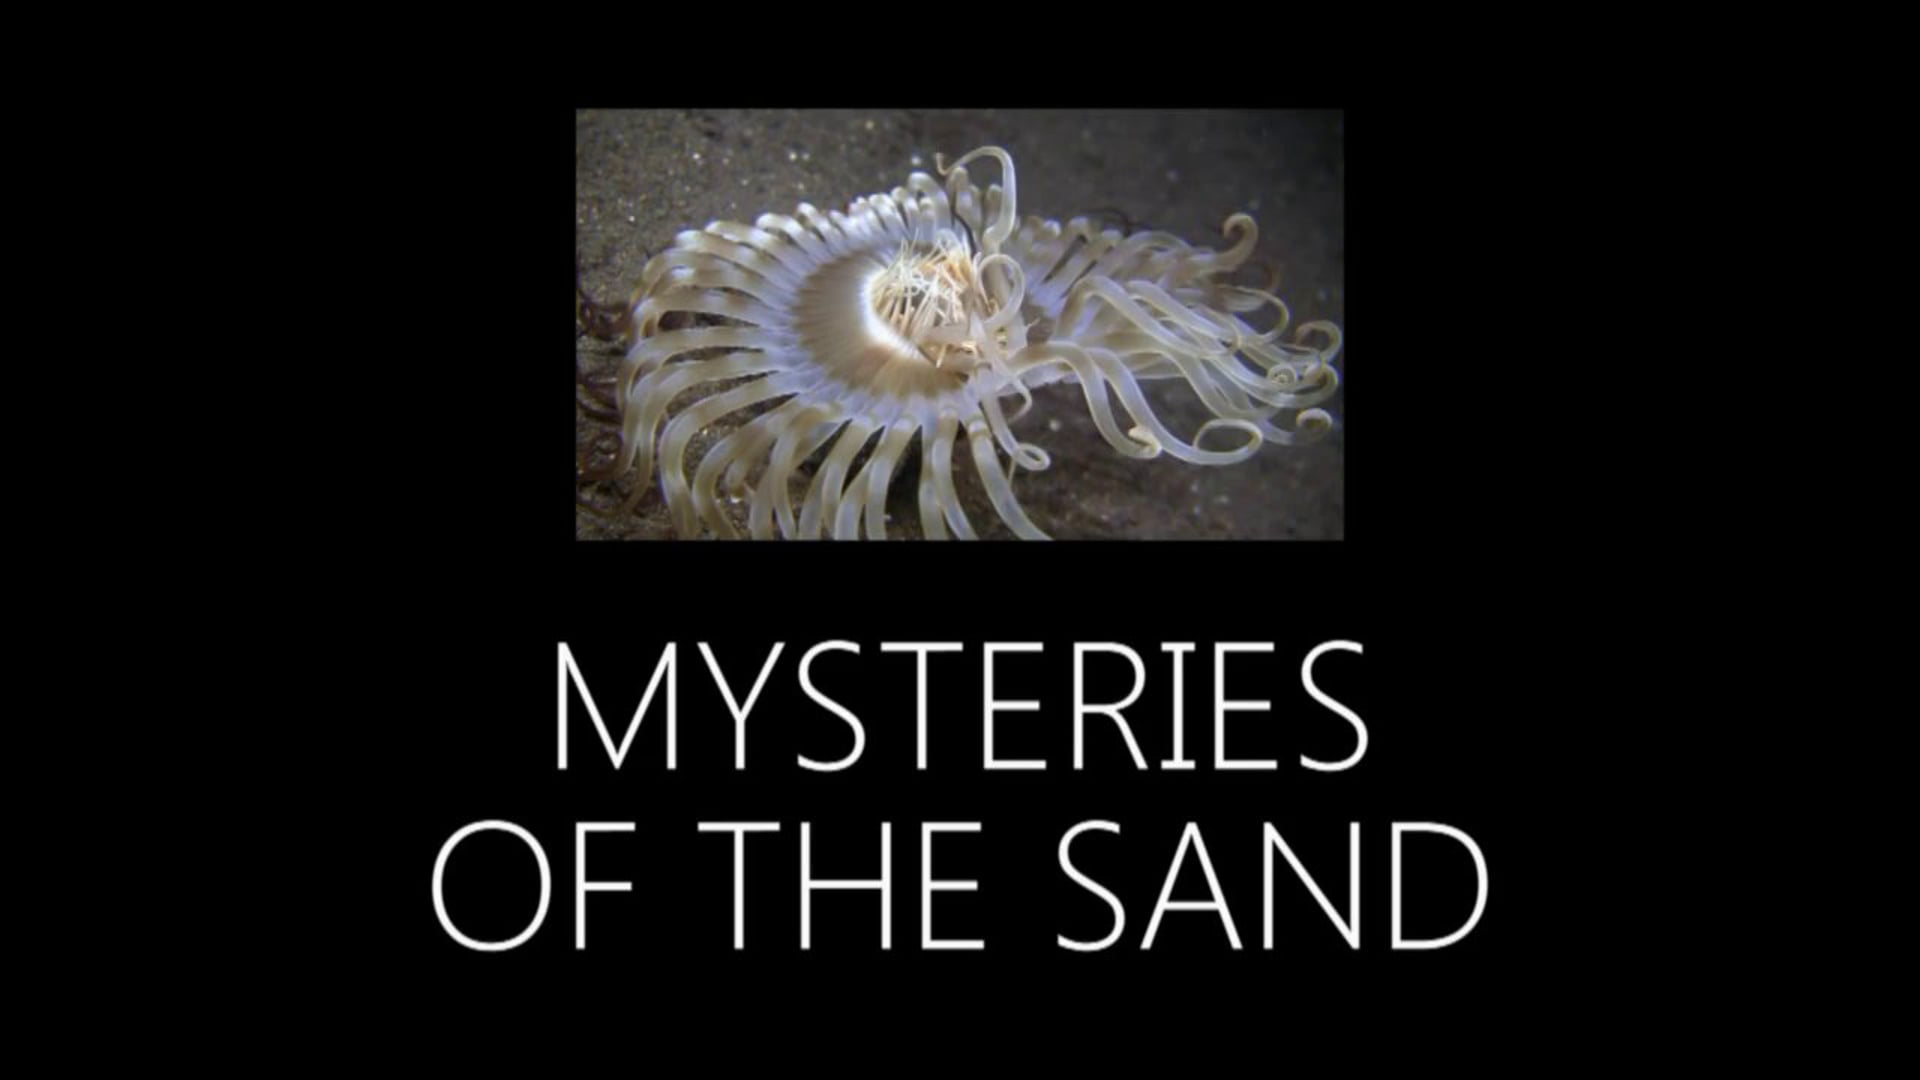 Mysteries of the Sand